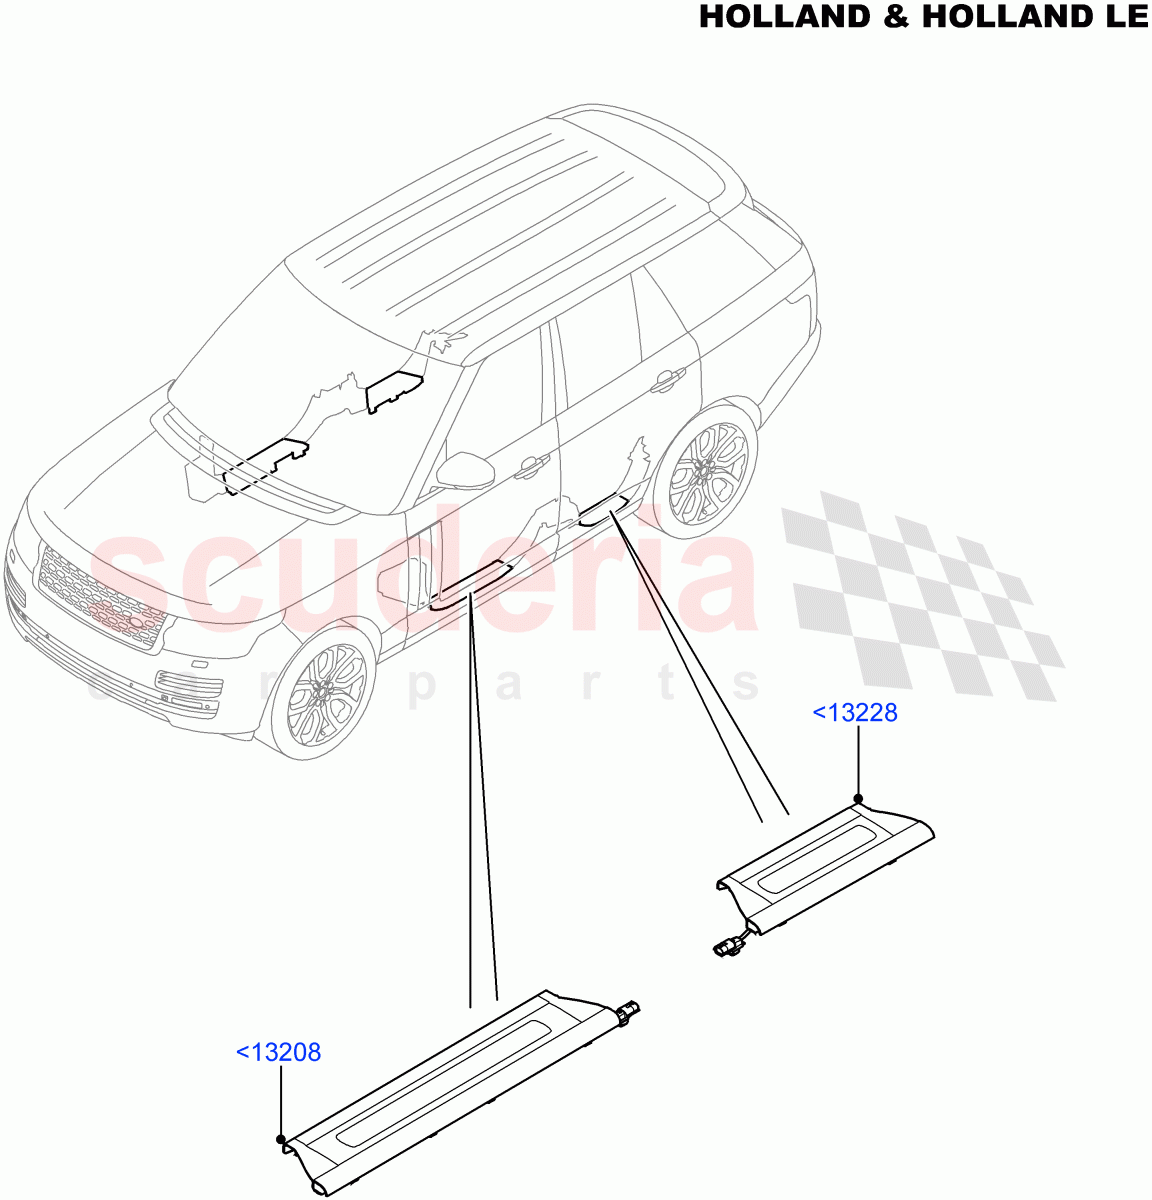 Side Trim(Holland & Holland LE, Sill)(Console Deployable Tables)((V)FROMFA000001) of Land Rover Land Rover Range Rover (2012-2021) [3.0 I6 Turbo Diesel AJ20D6]